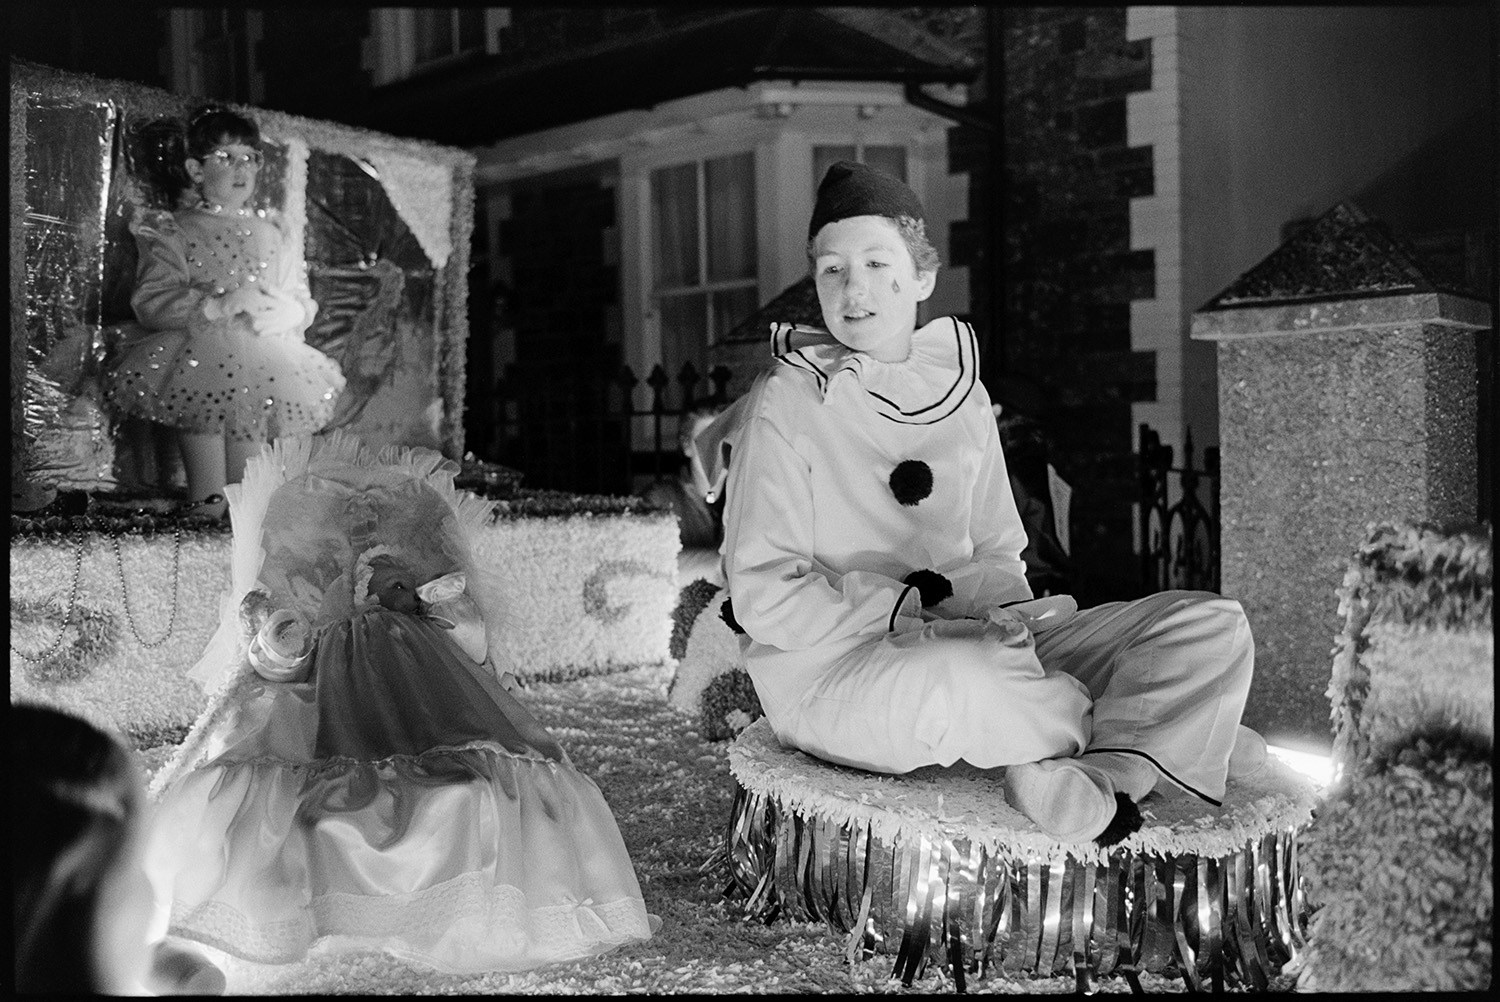 Carnival floats at night majorettes looking on. 
[Children in fancy dress on a carnival float at Dolton carnival at night. One of them is dressed as a pierrot character.]